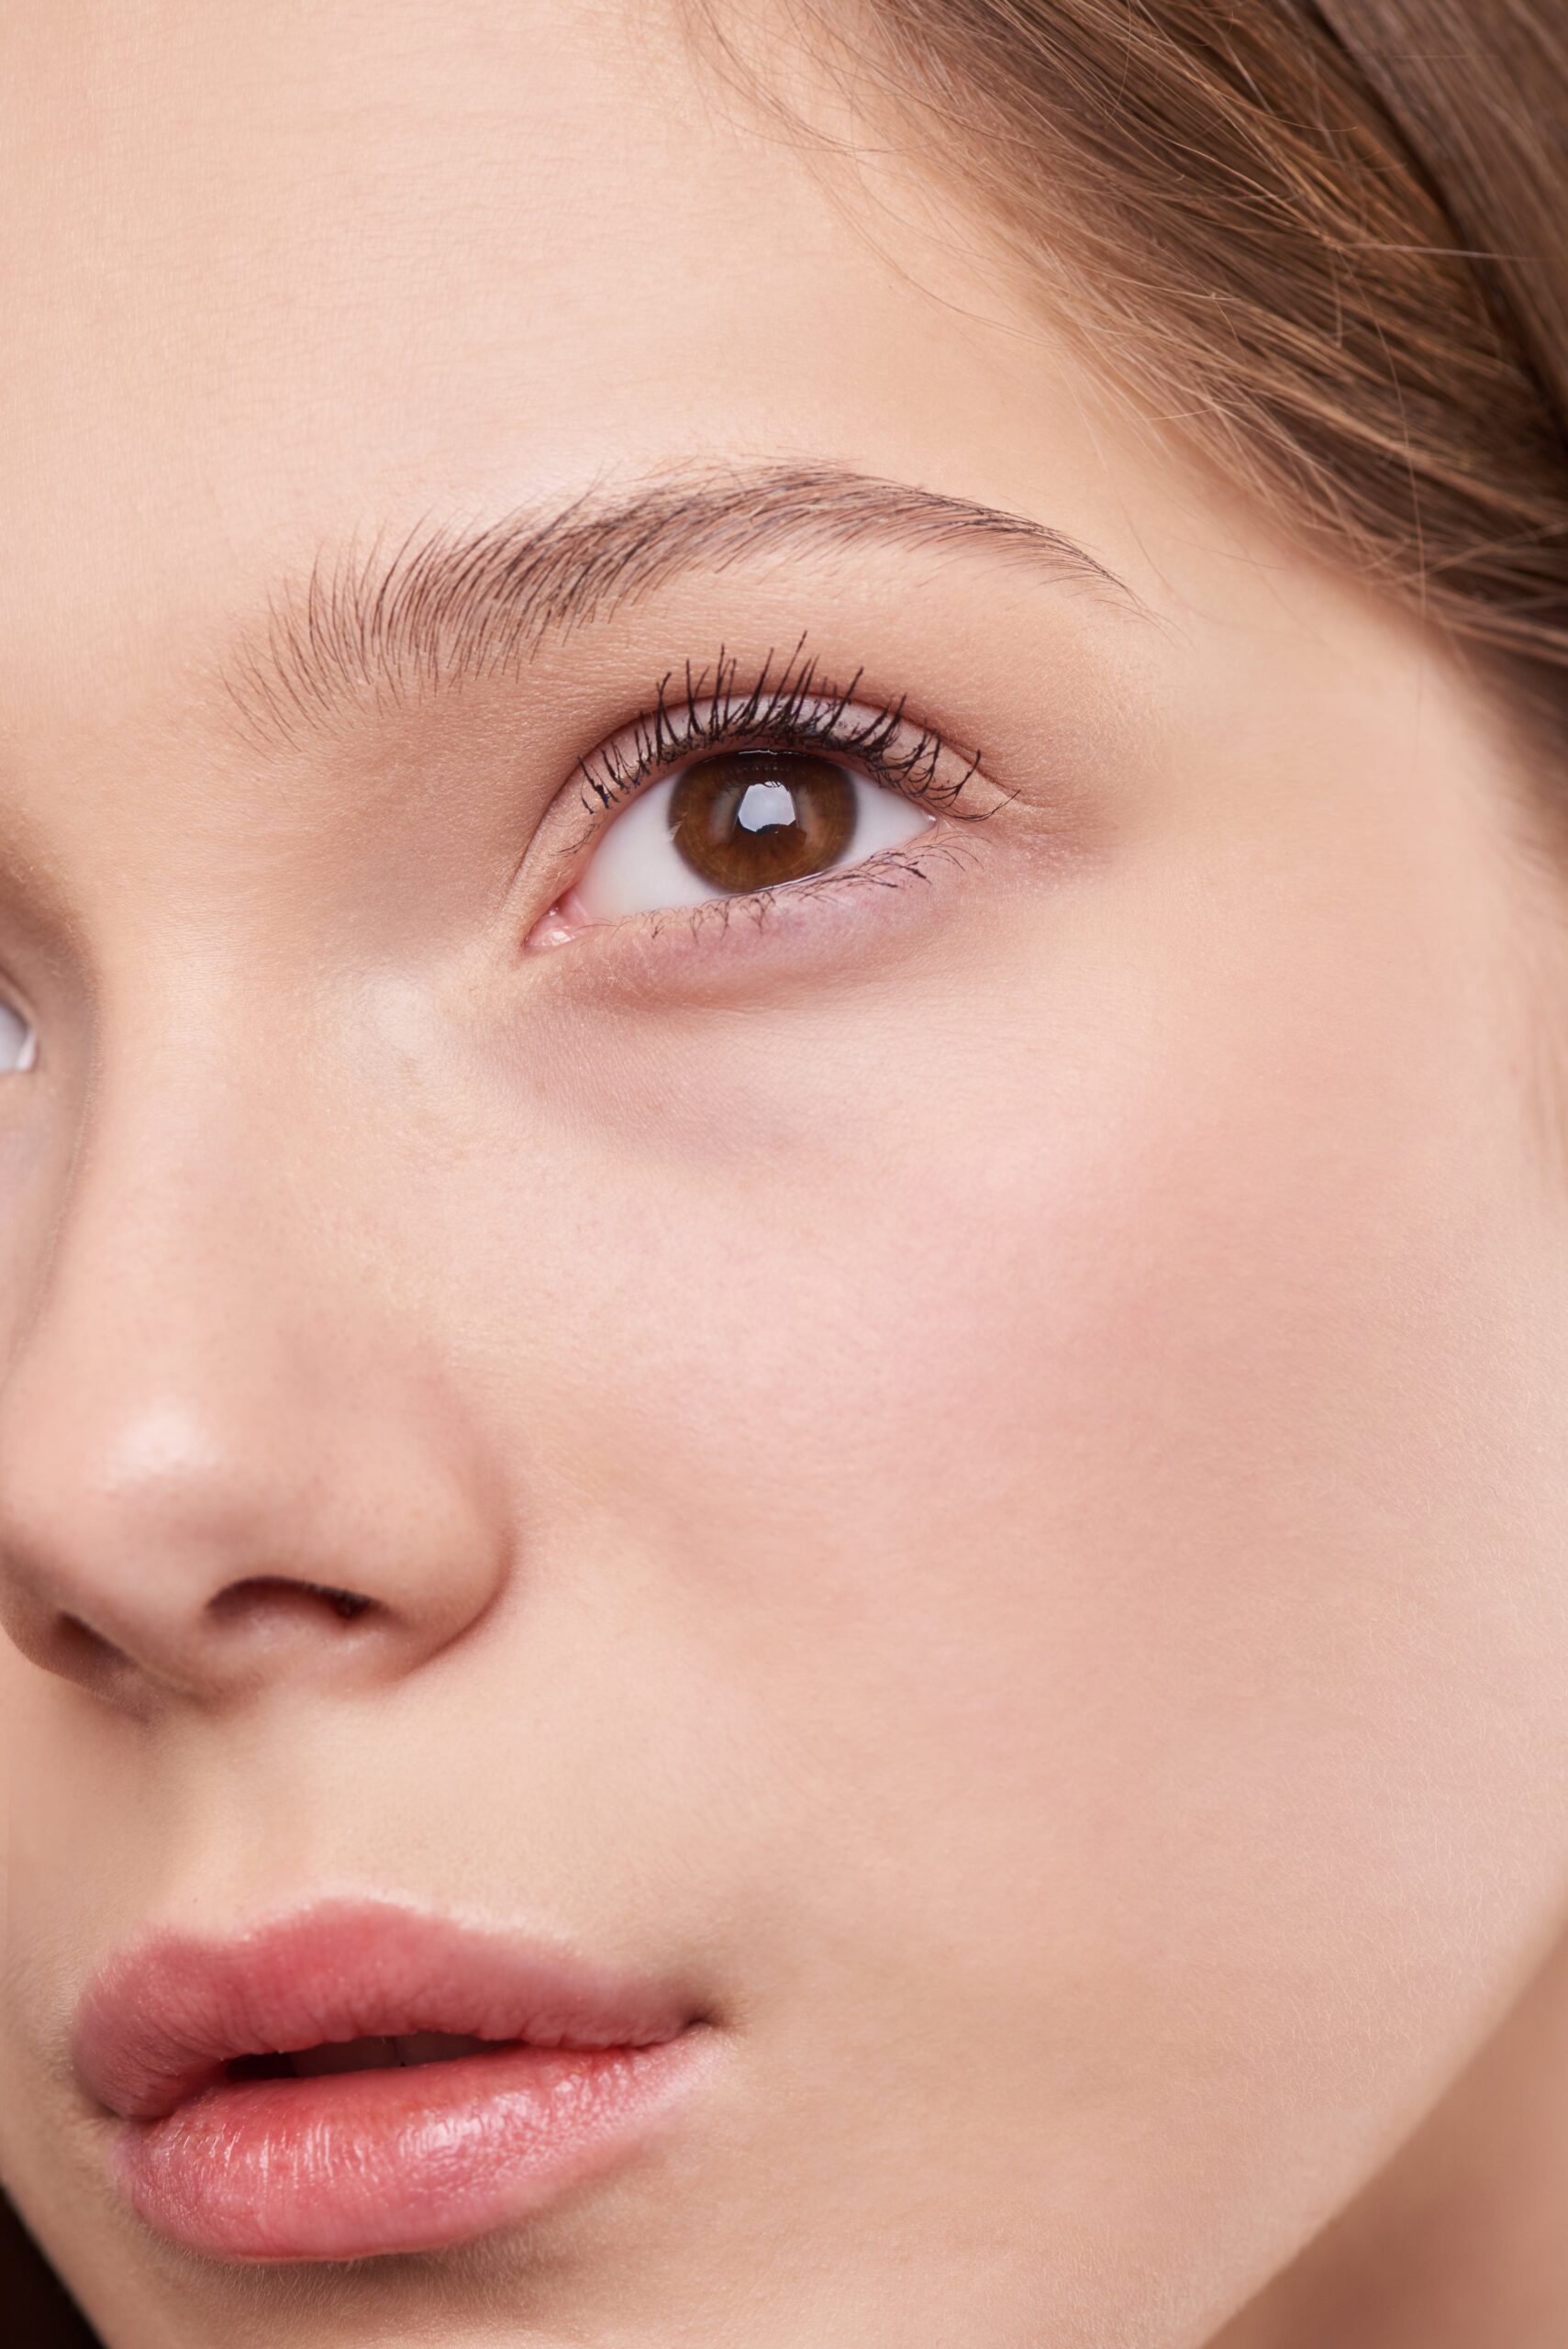 How Can I Address Oily Skin And Prevent Breakouts?